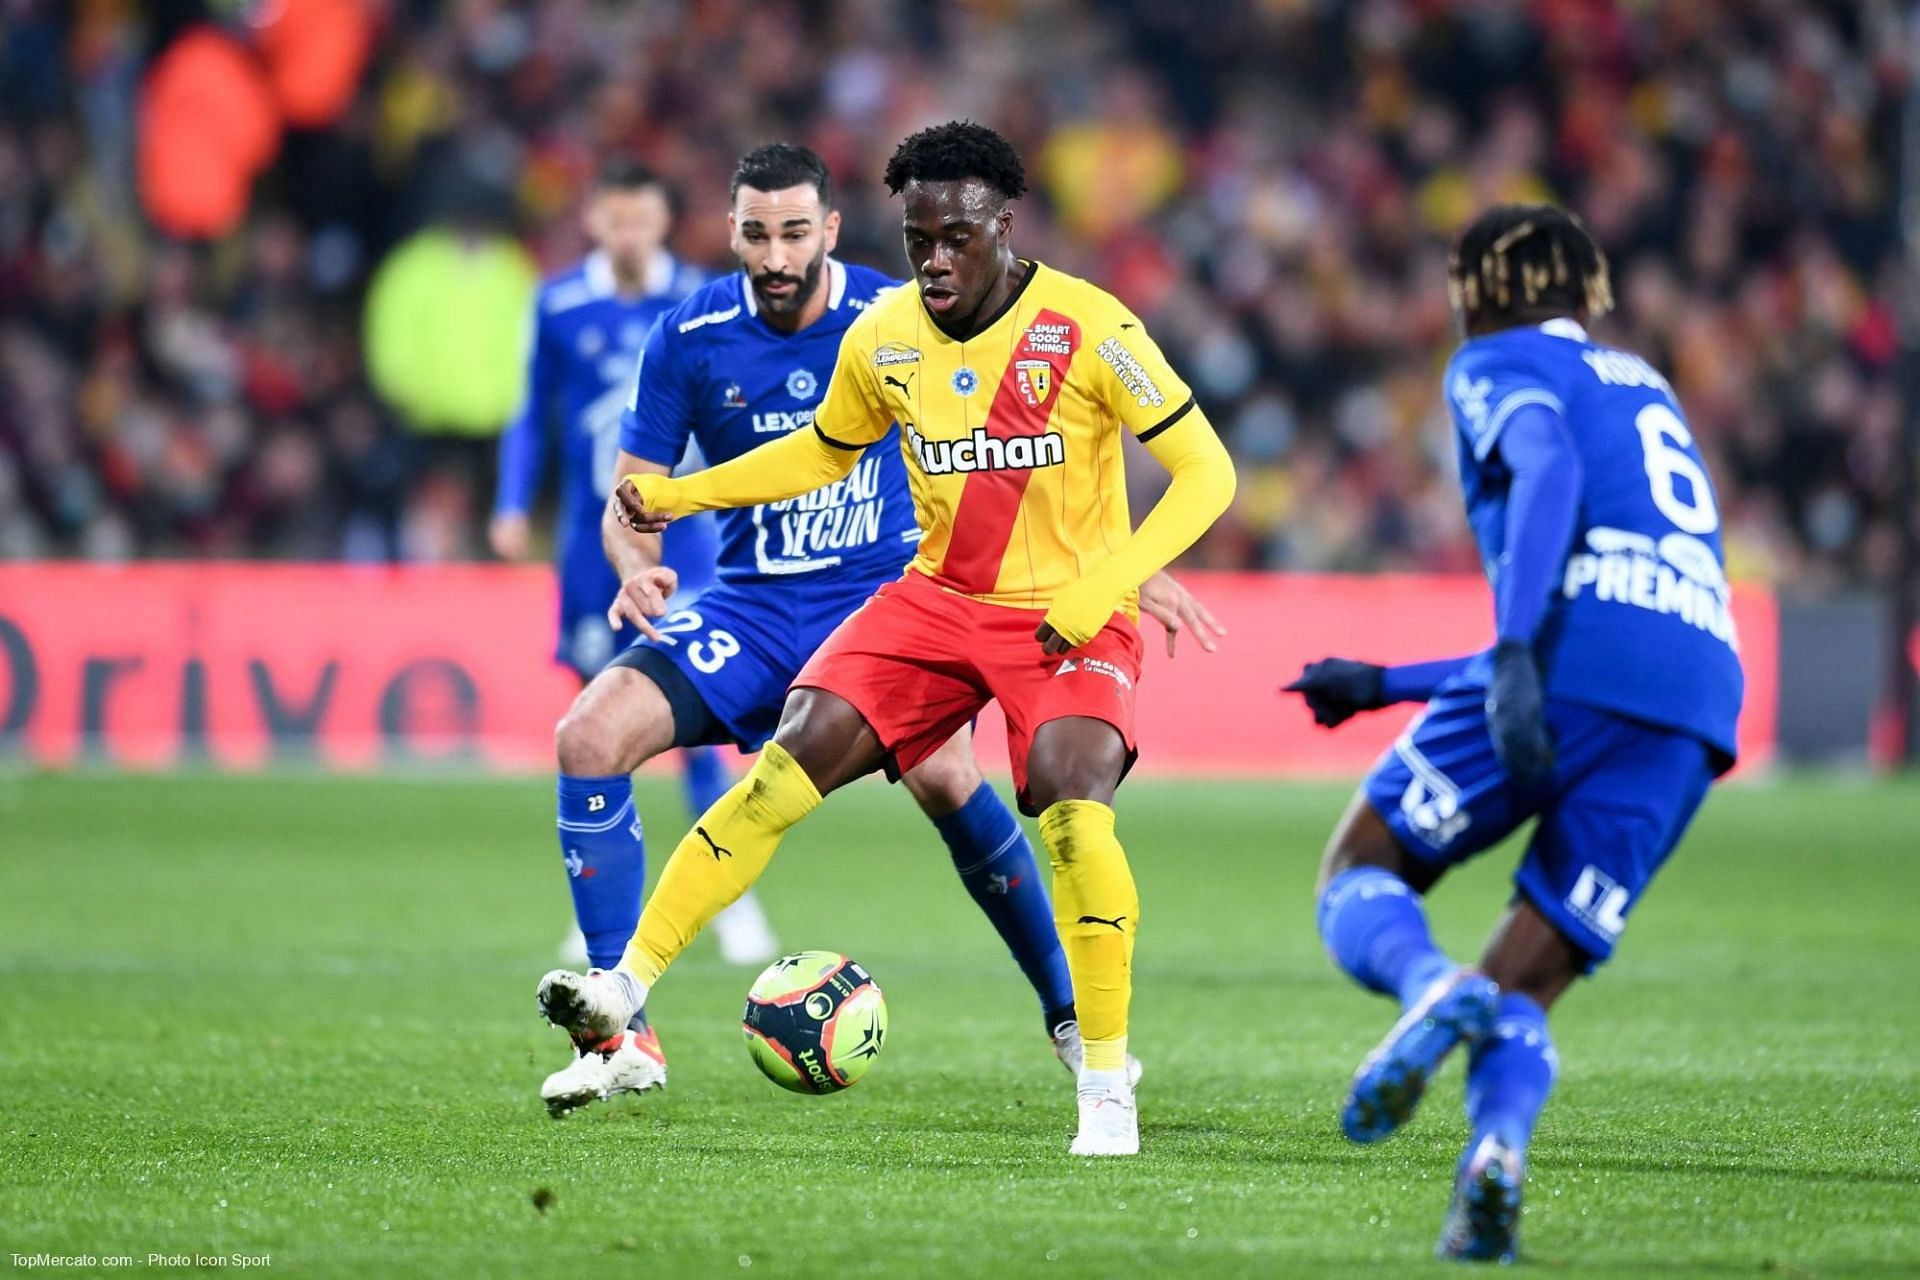 Lens and Troyes meet in Ligue 1 on Friday